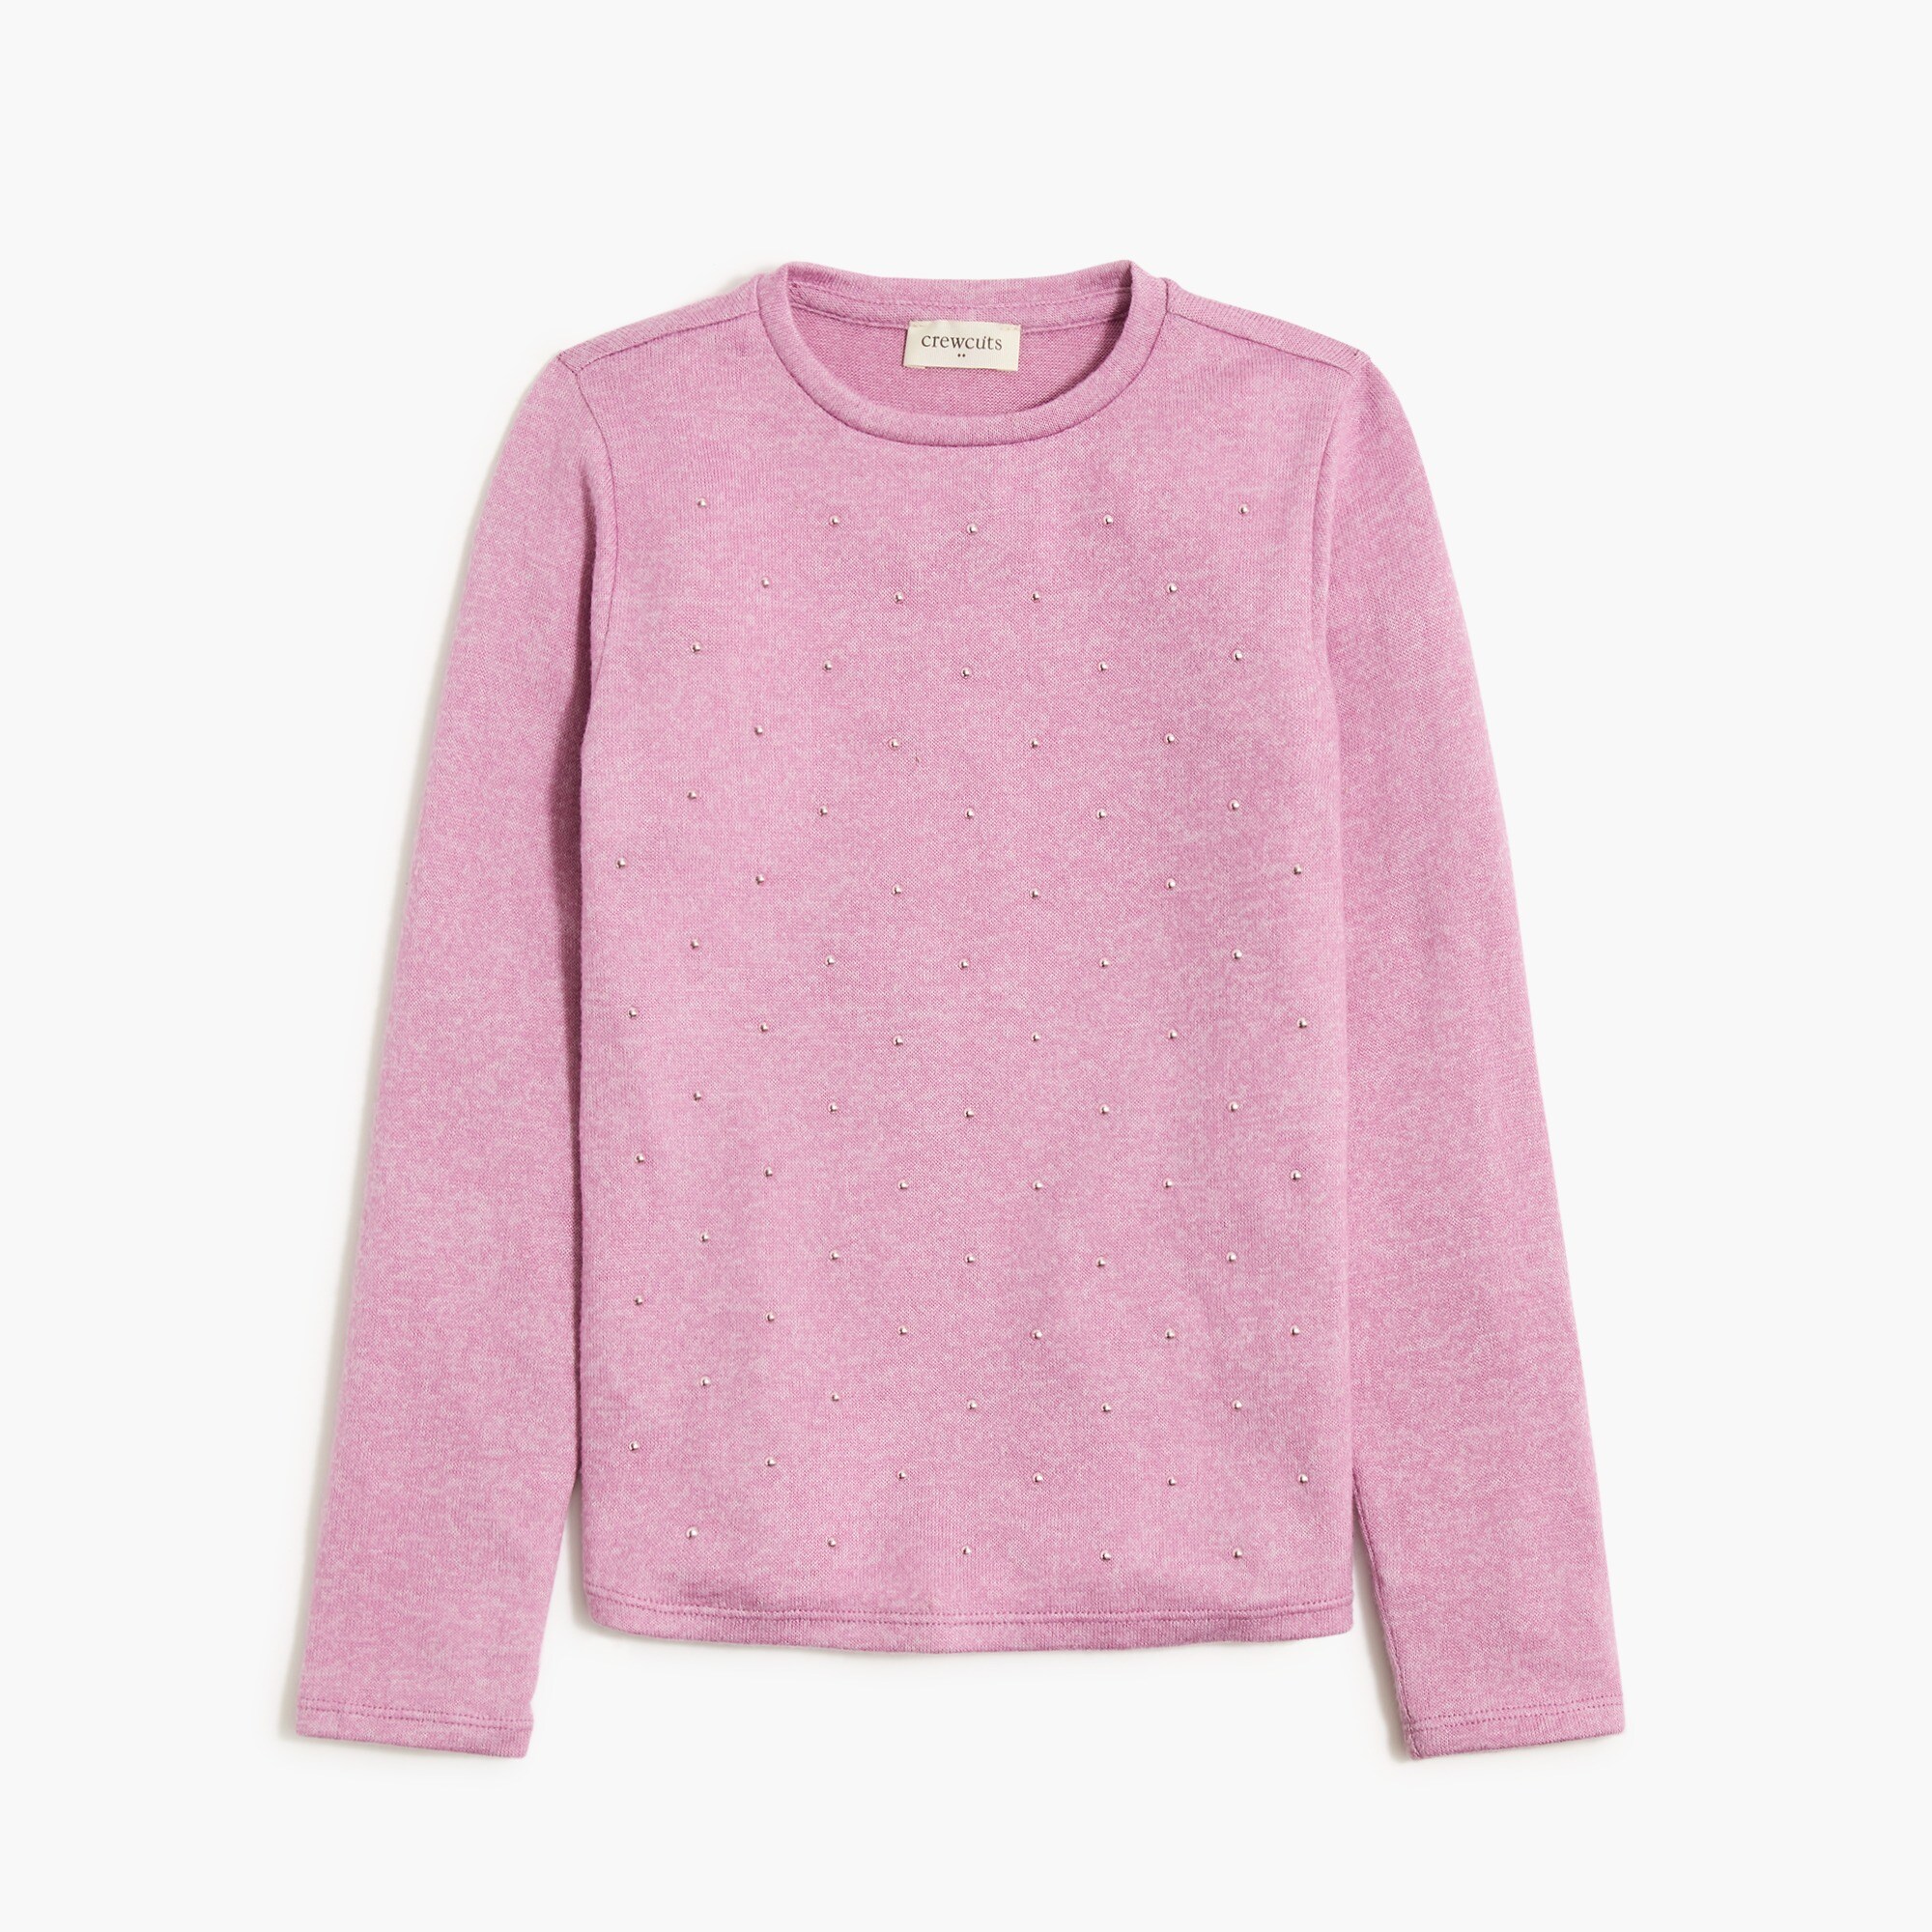  Girls' extra-soft bejeweled top